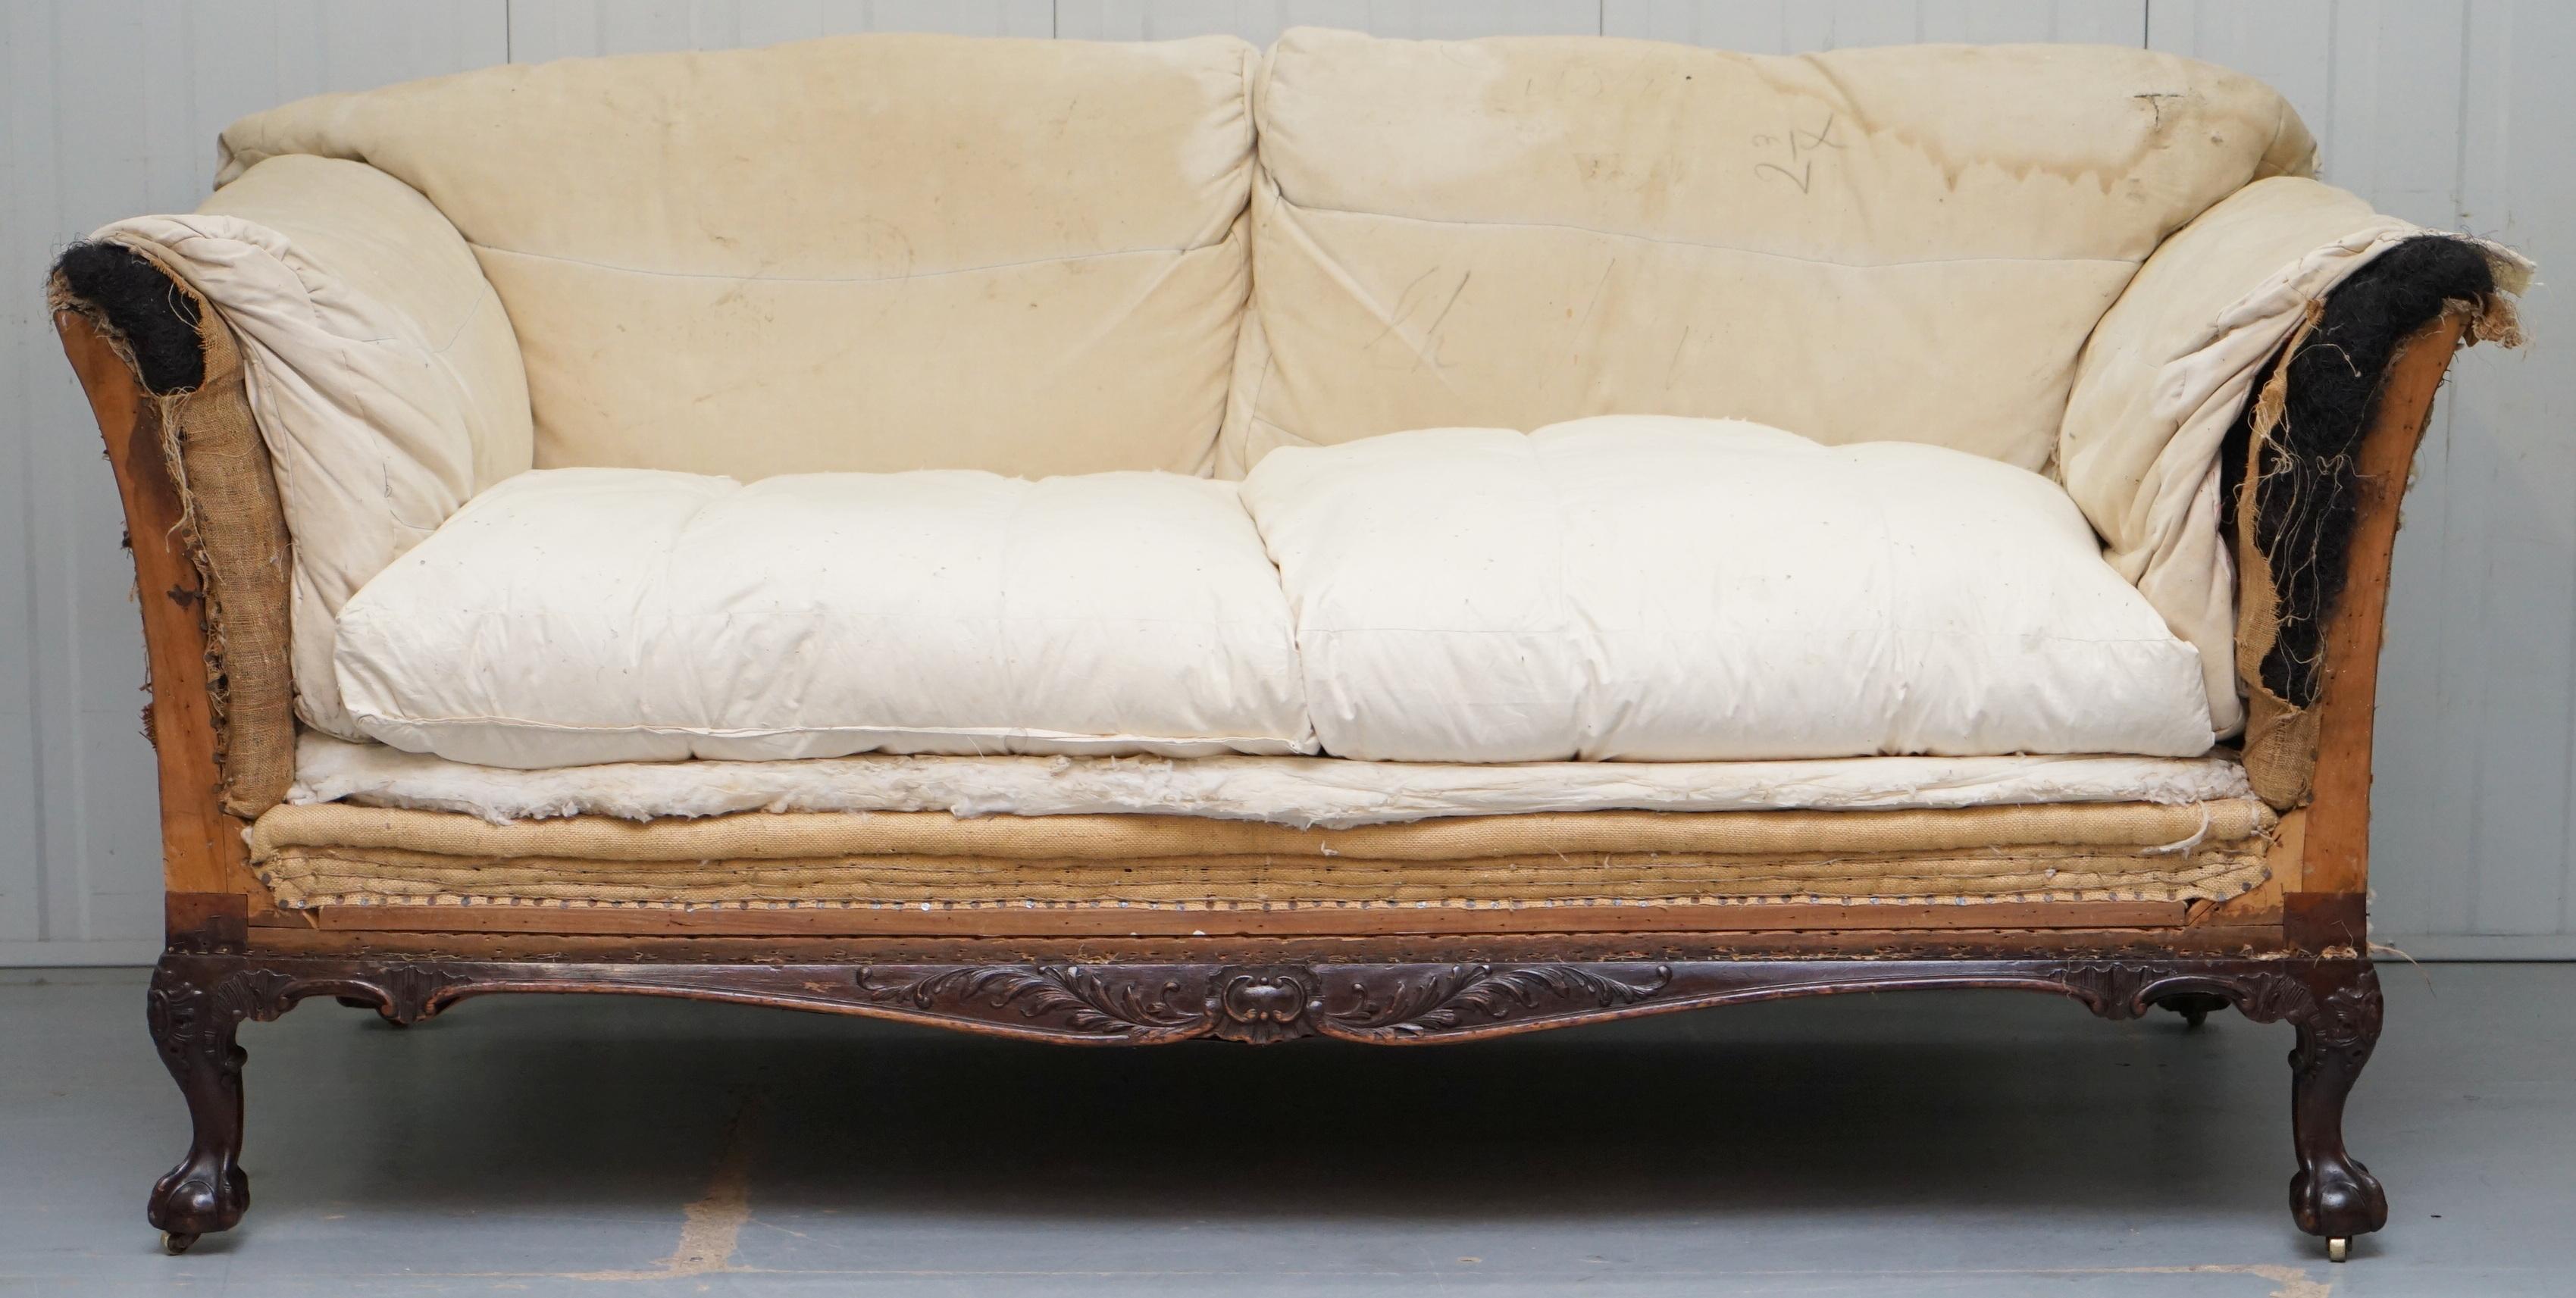 We are delighted to offer for sale this stunning exceptionally rare original Victorian walnut framed claw and ball feet Howard & Son’s Berners Street stamped sofa with the original feather filled cushions and horse hair filling

This sofa is